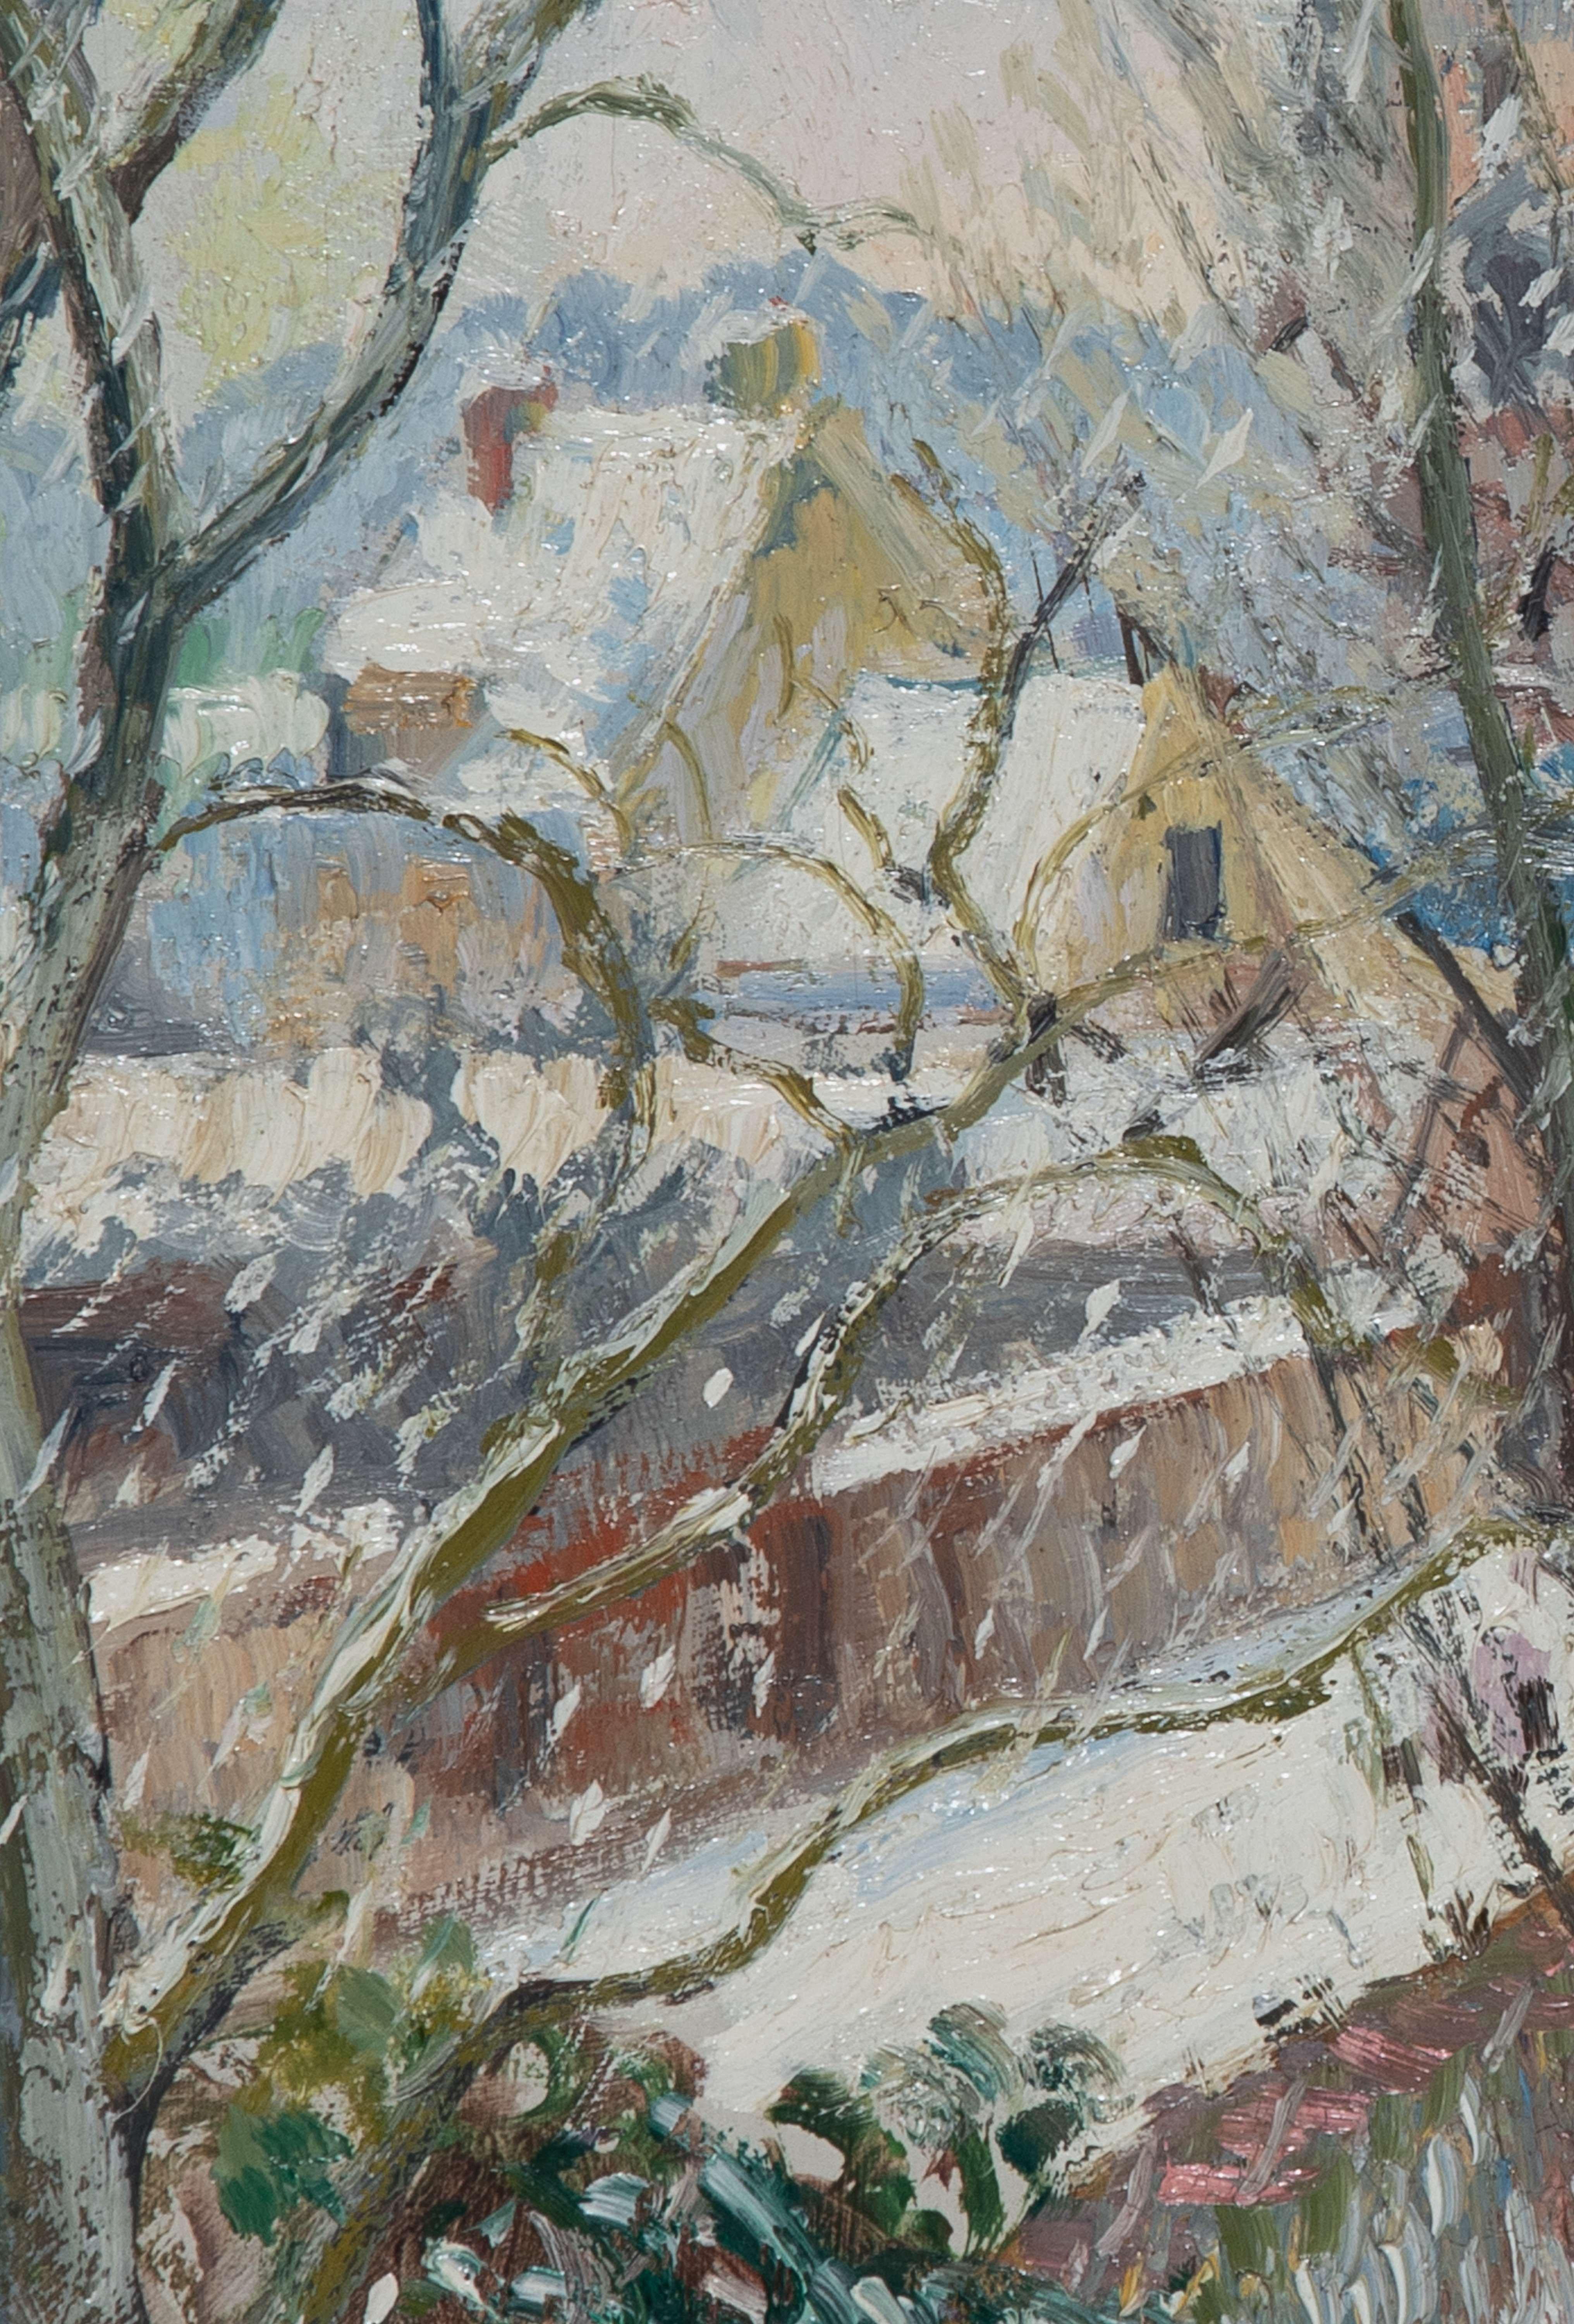 Les Andelys sous la Neige by Georges Manzana Pissarro (1871-1961)
Oil on board
46 x 38 cm (18 ¹/₈ x 15 inches)
Signed lower right, Manzana
Executed circa 1895

Painted during Camille Pissarro's lifetime this is a very rare work

This work is